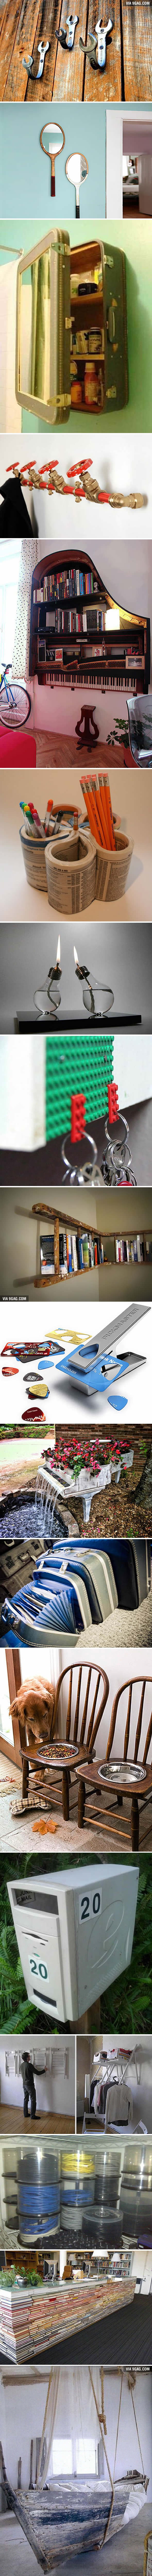 18 Incredible Things You Can Make From Old Stuff